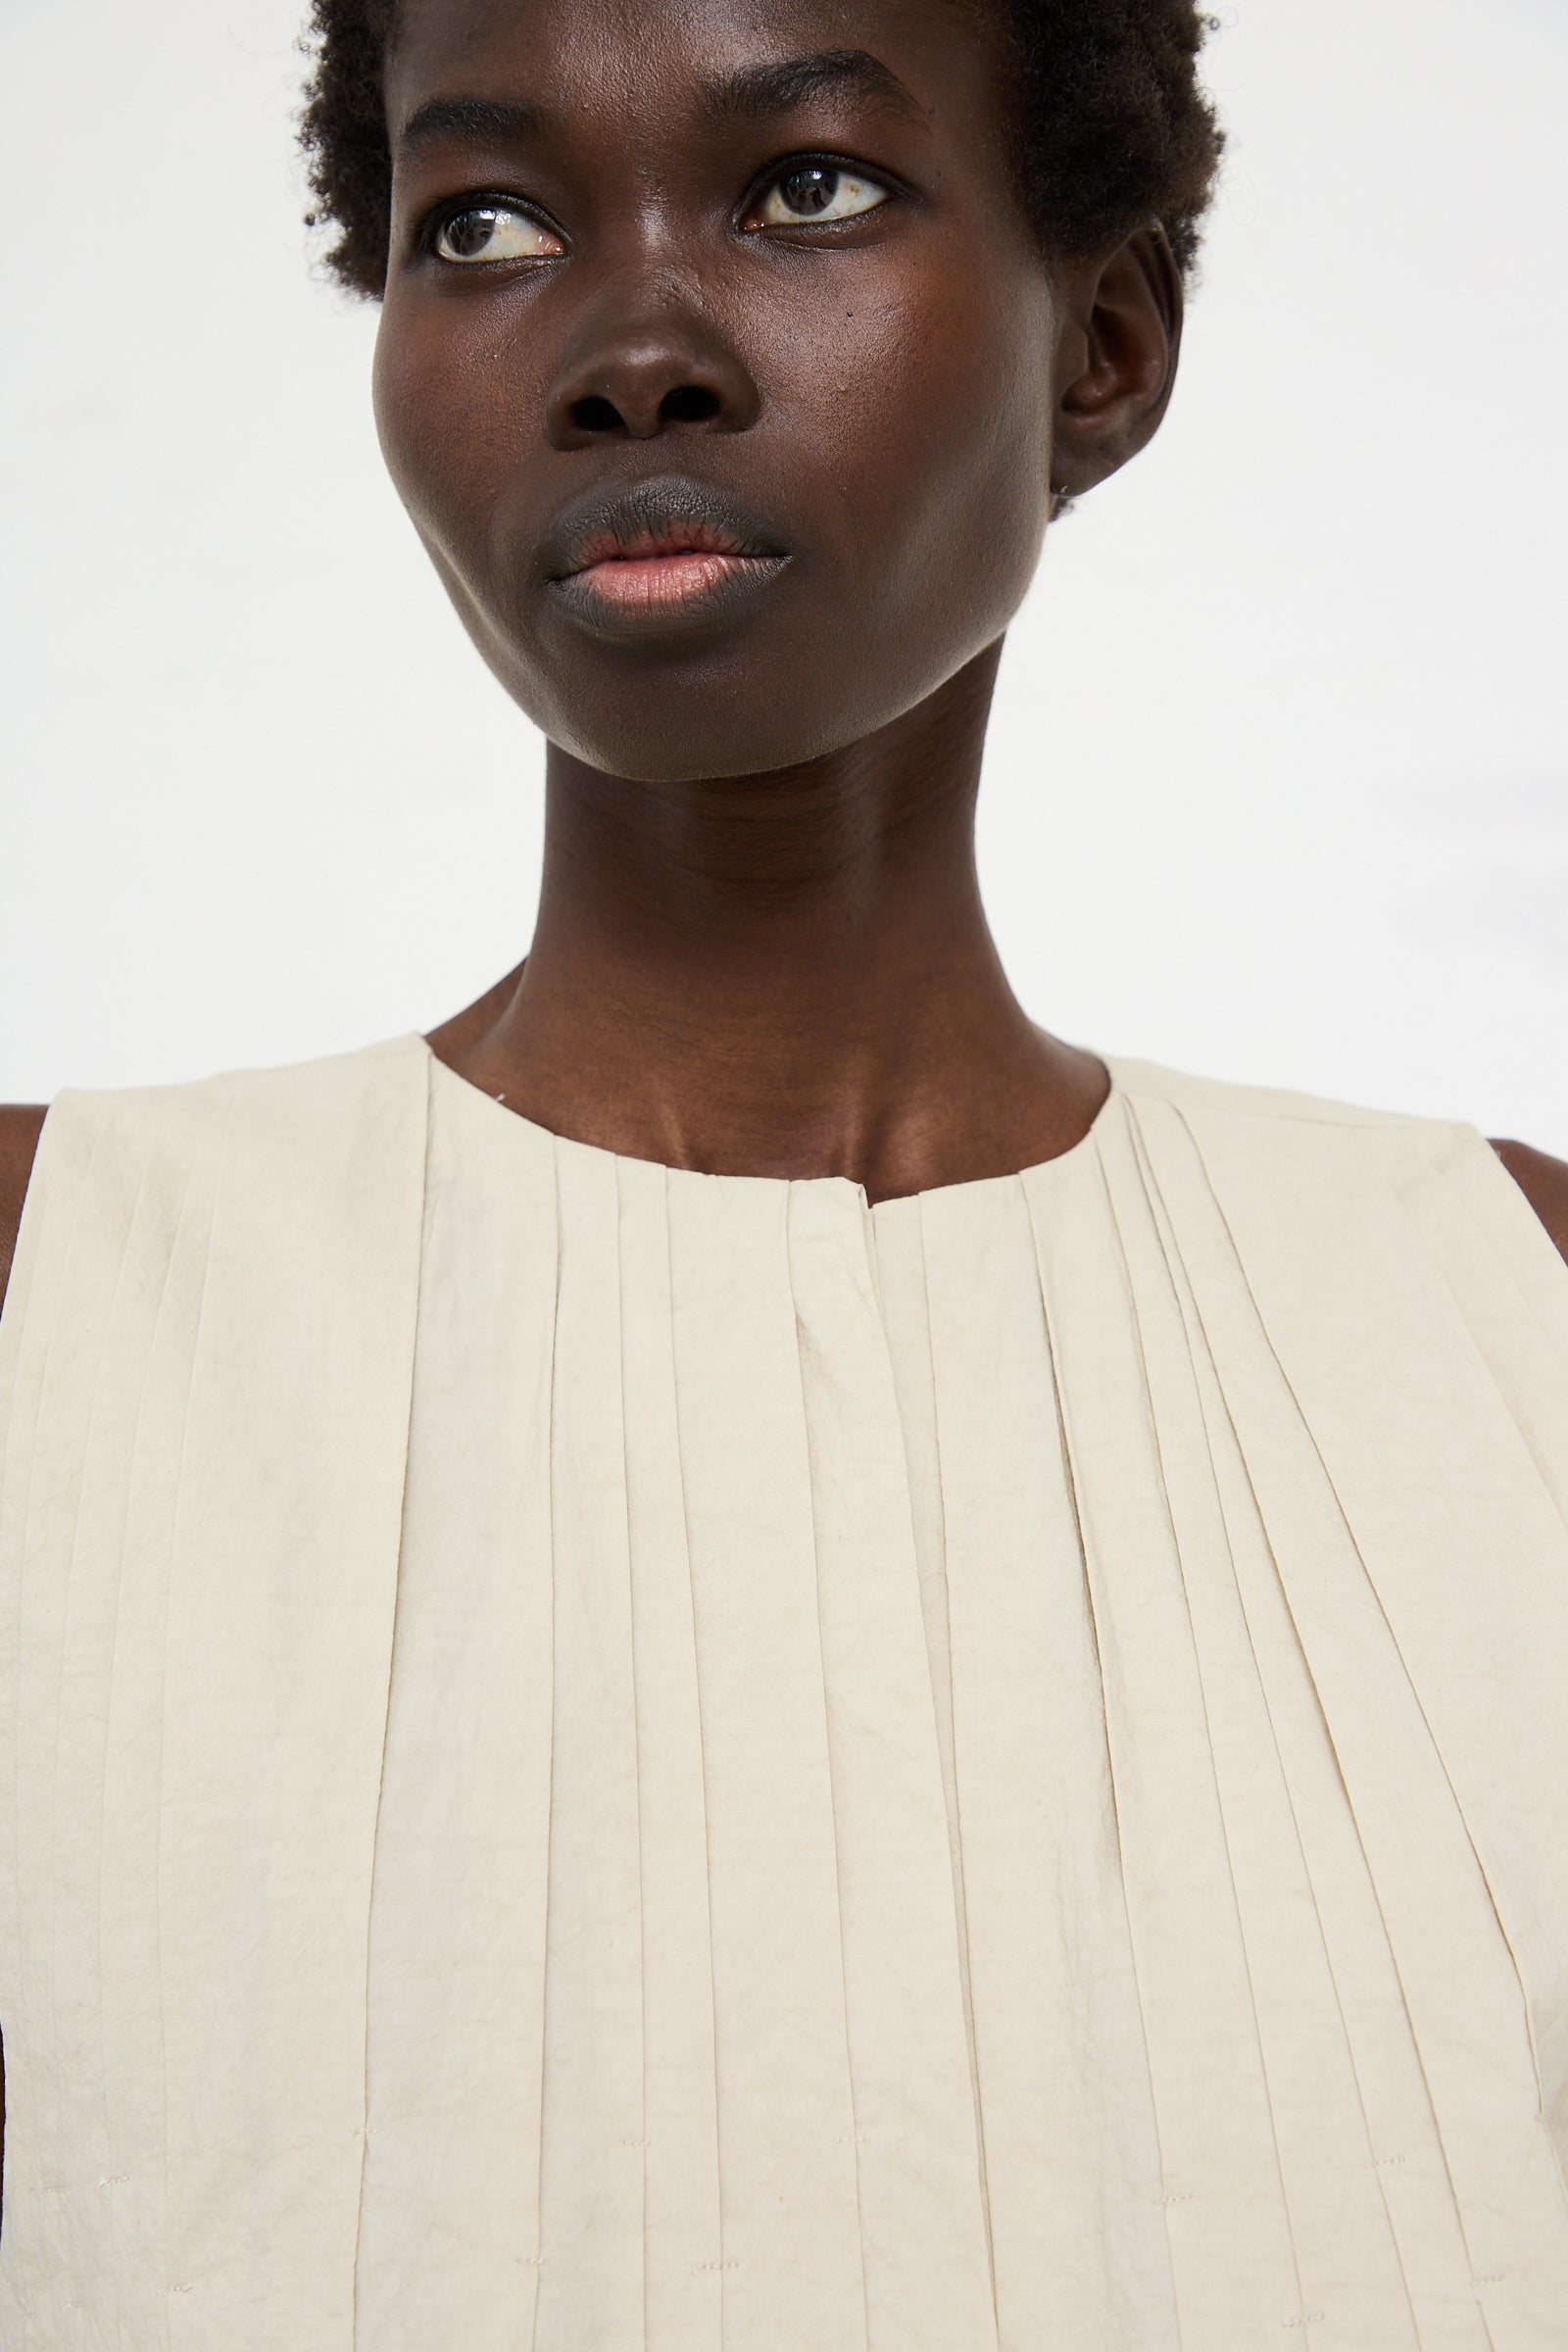 A person with short hair looks slightly to the side, wearing a Hand Pleat Dress in Greige by Lauren Manoogian against a plain background.